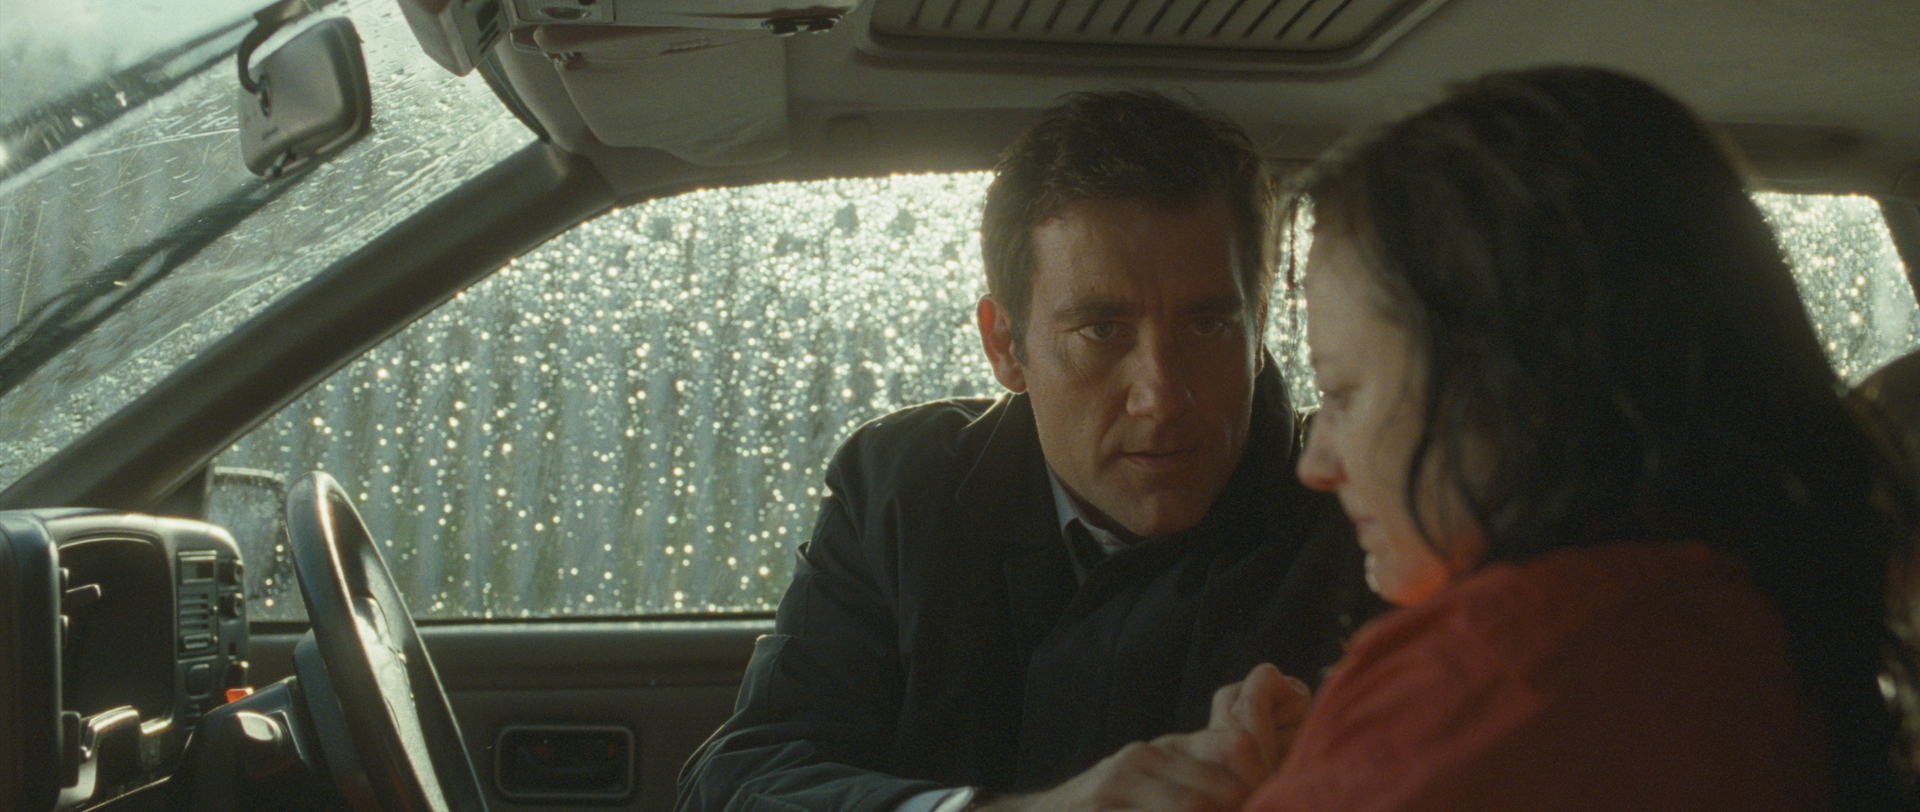 Still of Clive Owen and Andrea Riseborough in Shadow Dancer (2012)